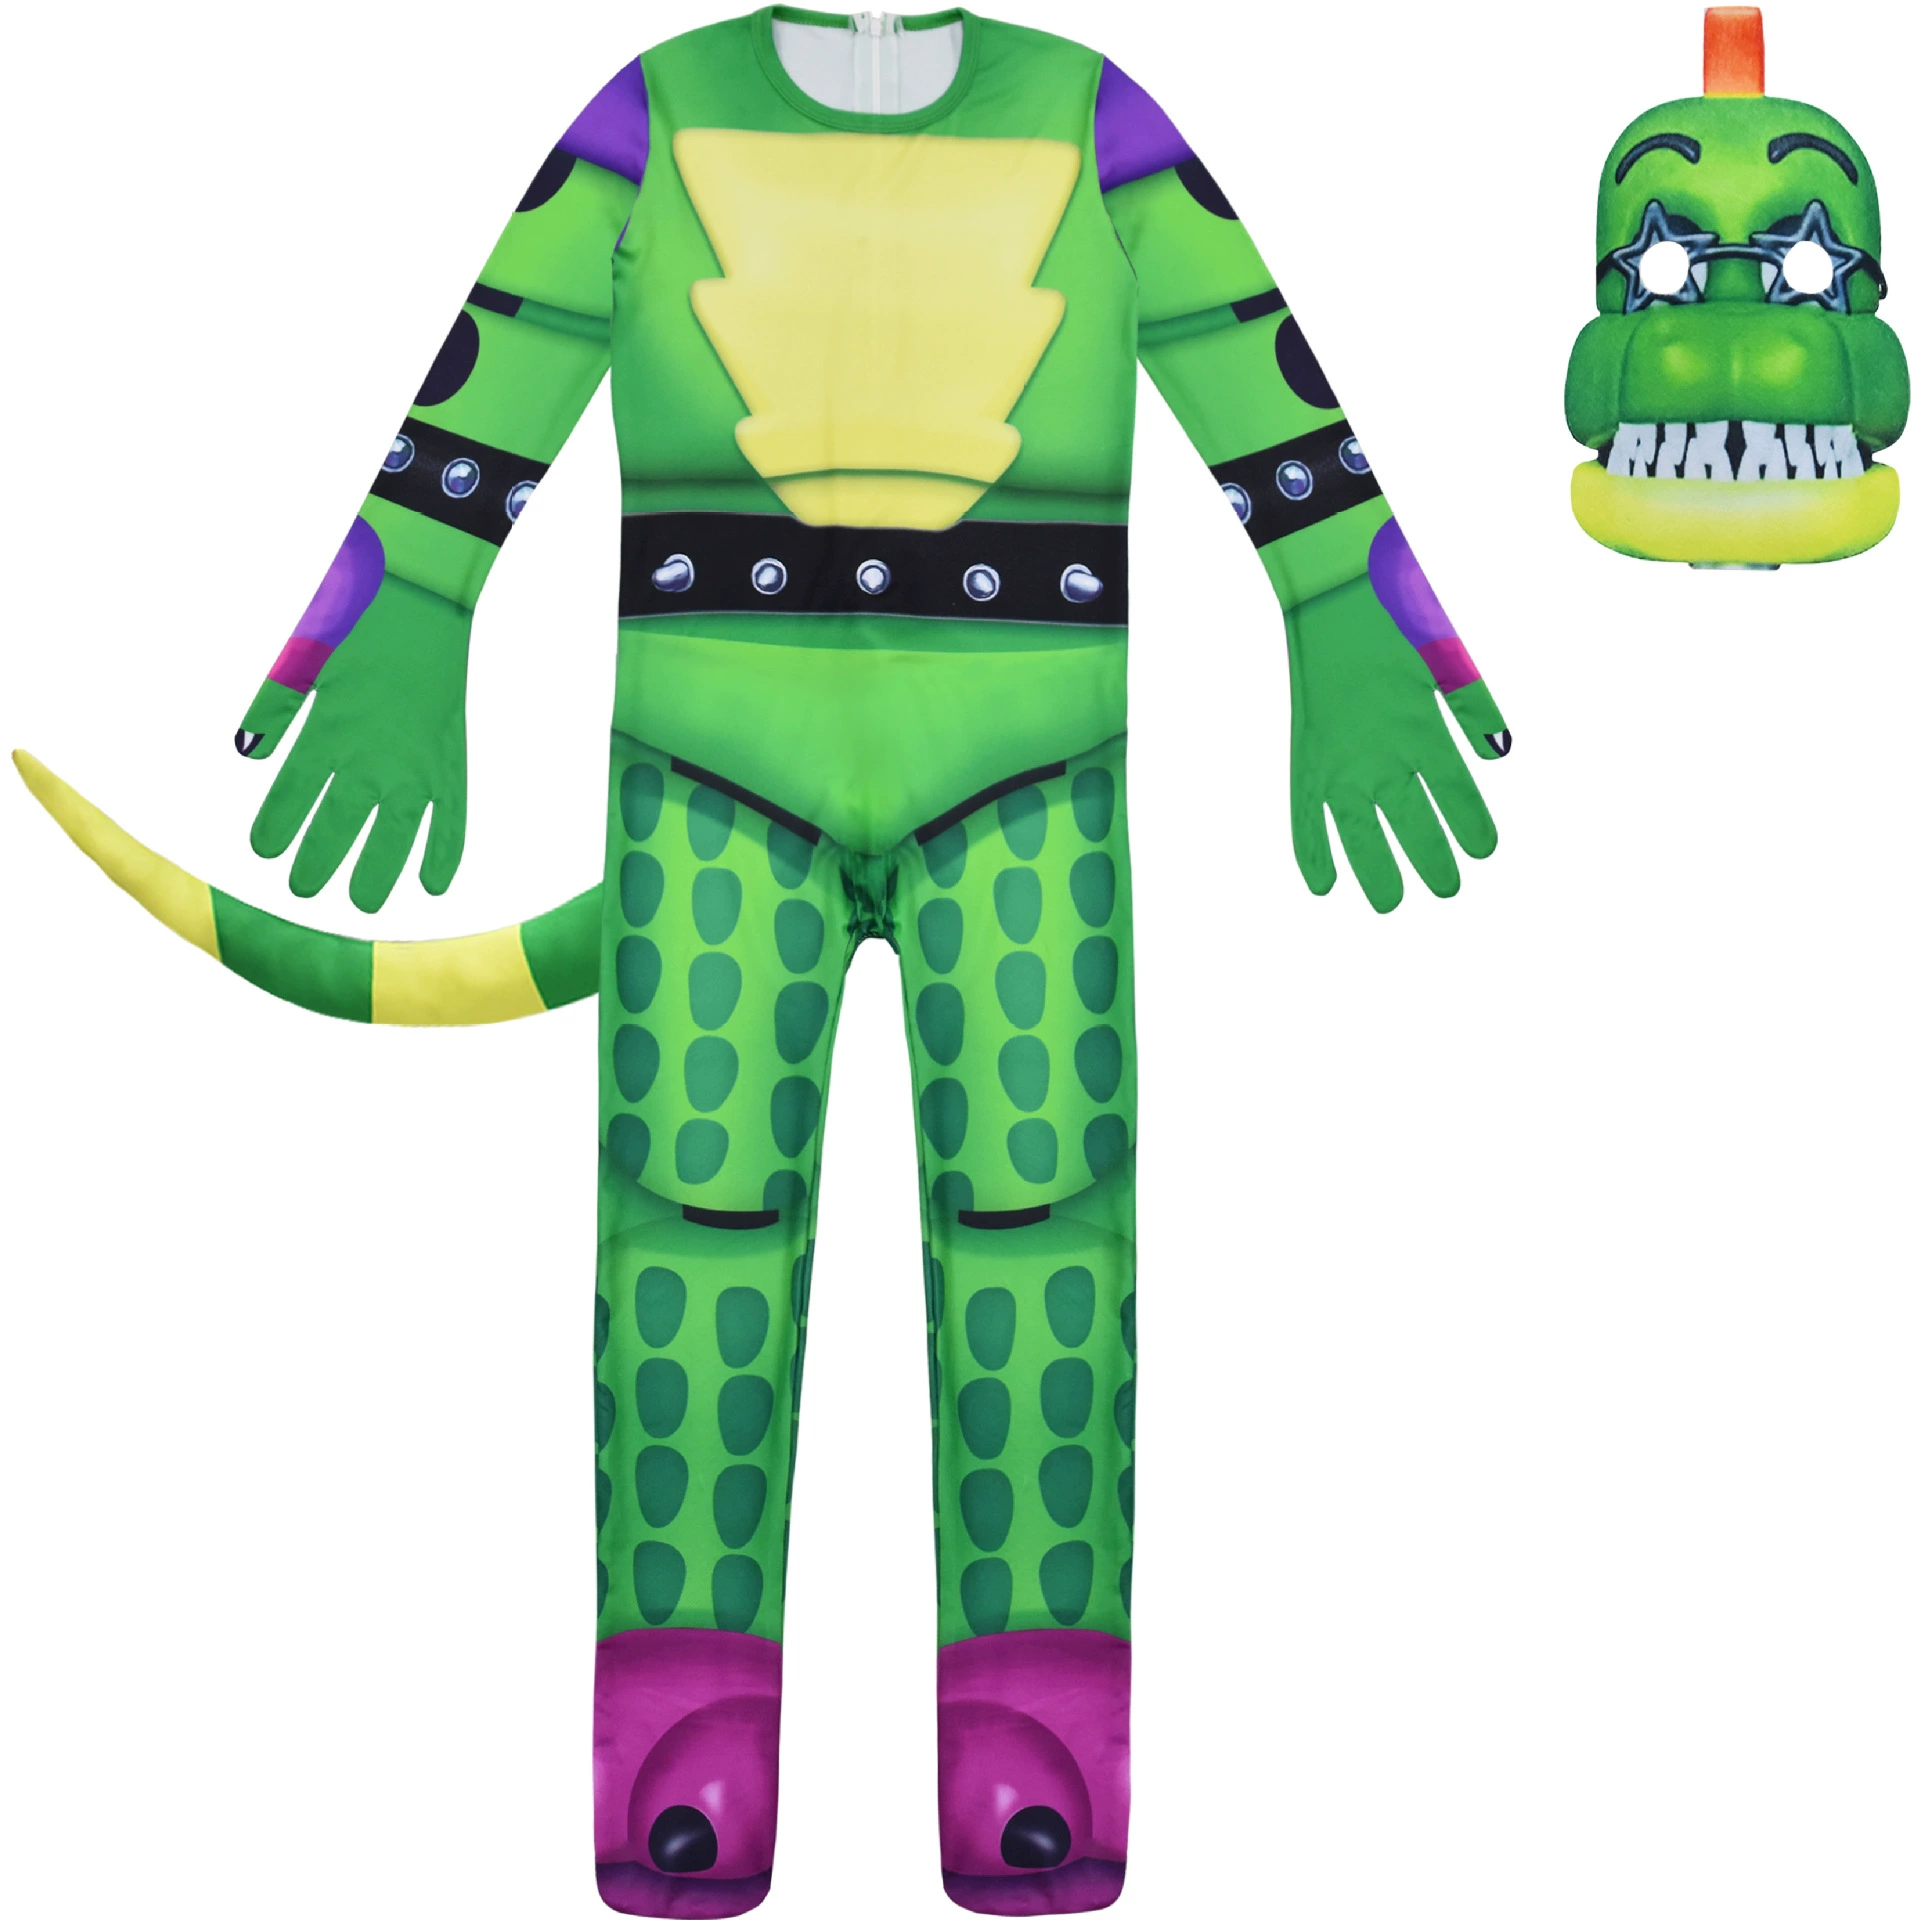 Halloween Costumes for Kids FNAF Sundrop moondrop Cosplay Bodysuit Boys Girls Anime Freddie Character Fancy Dress Party Clothing Clothing Sets	